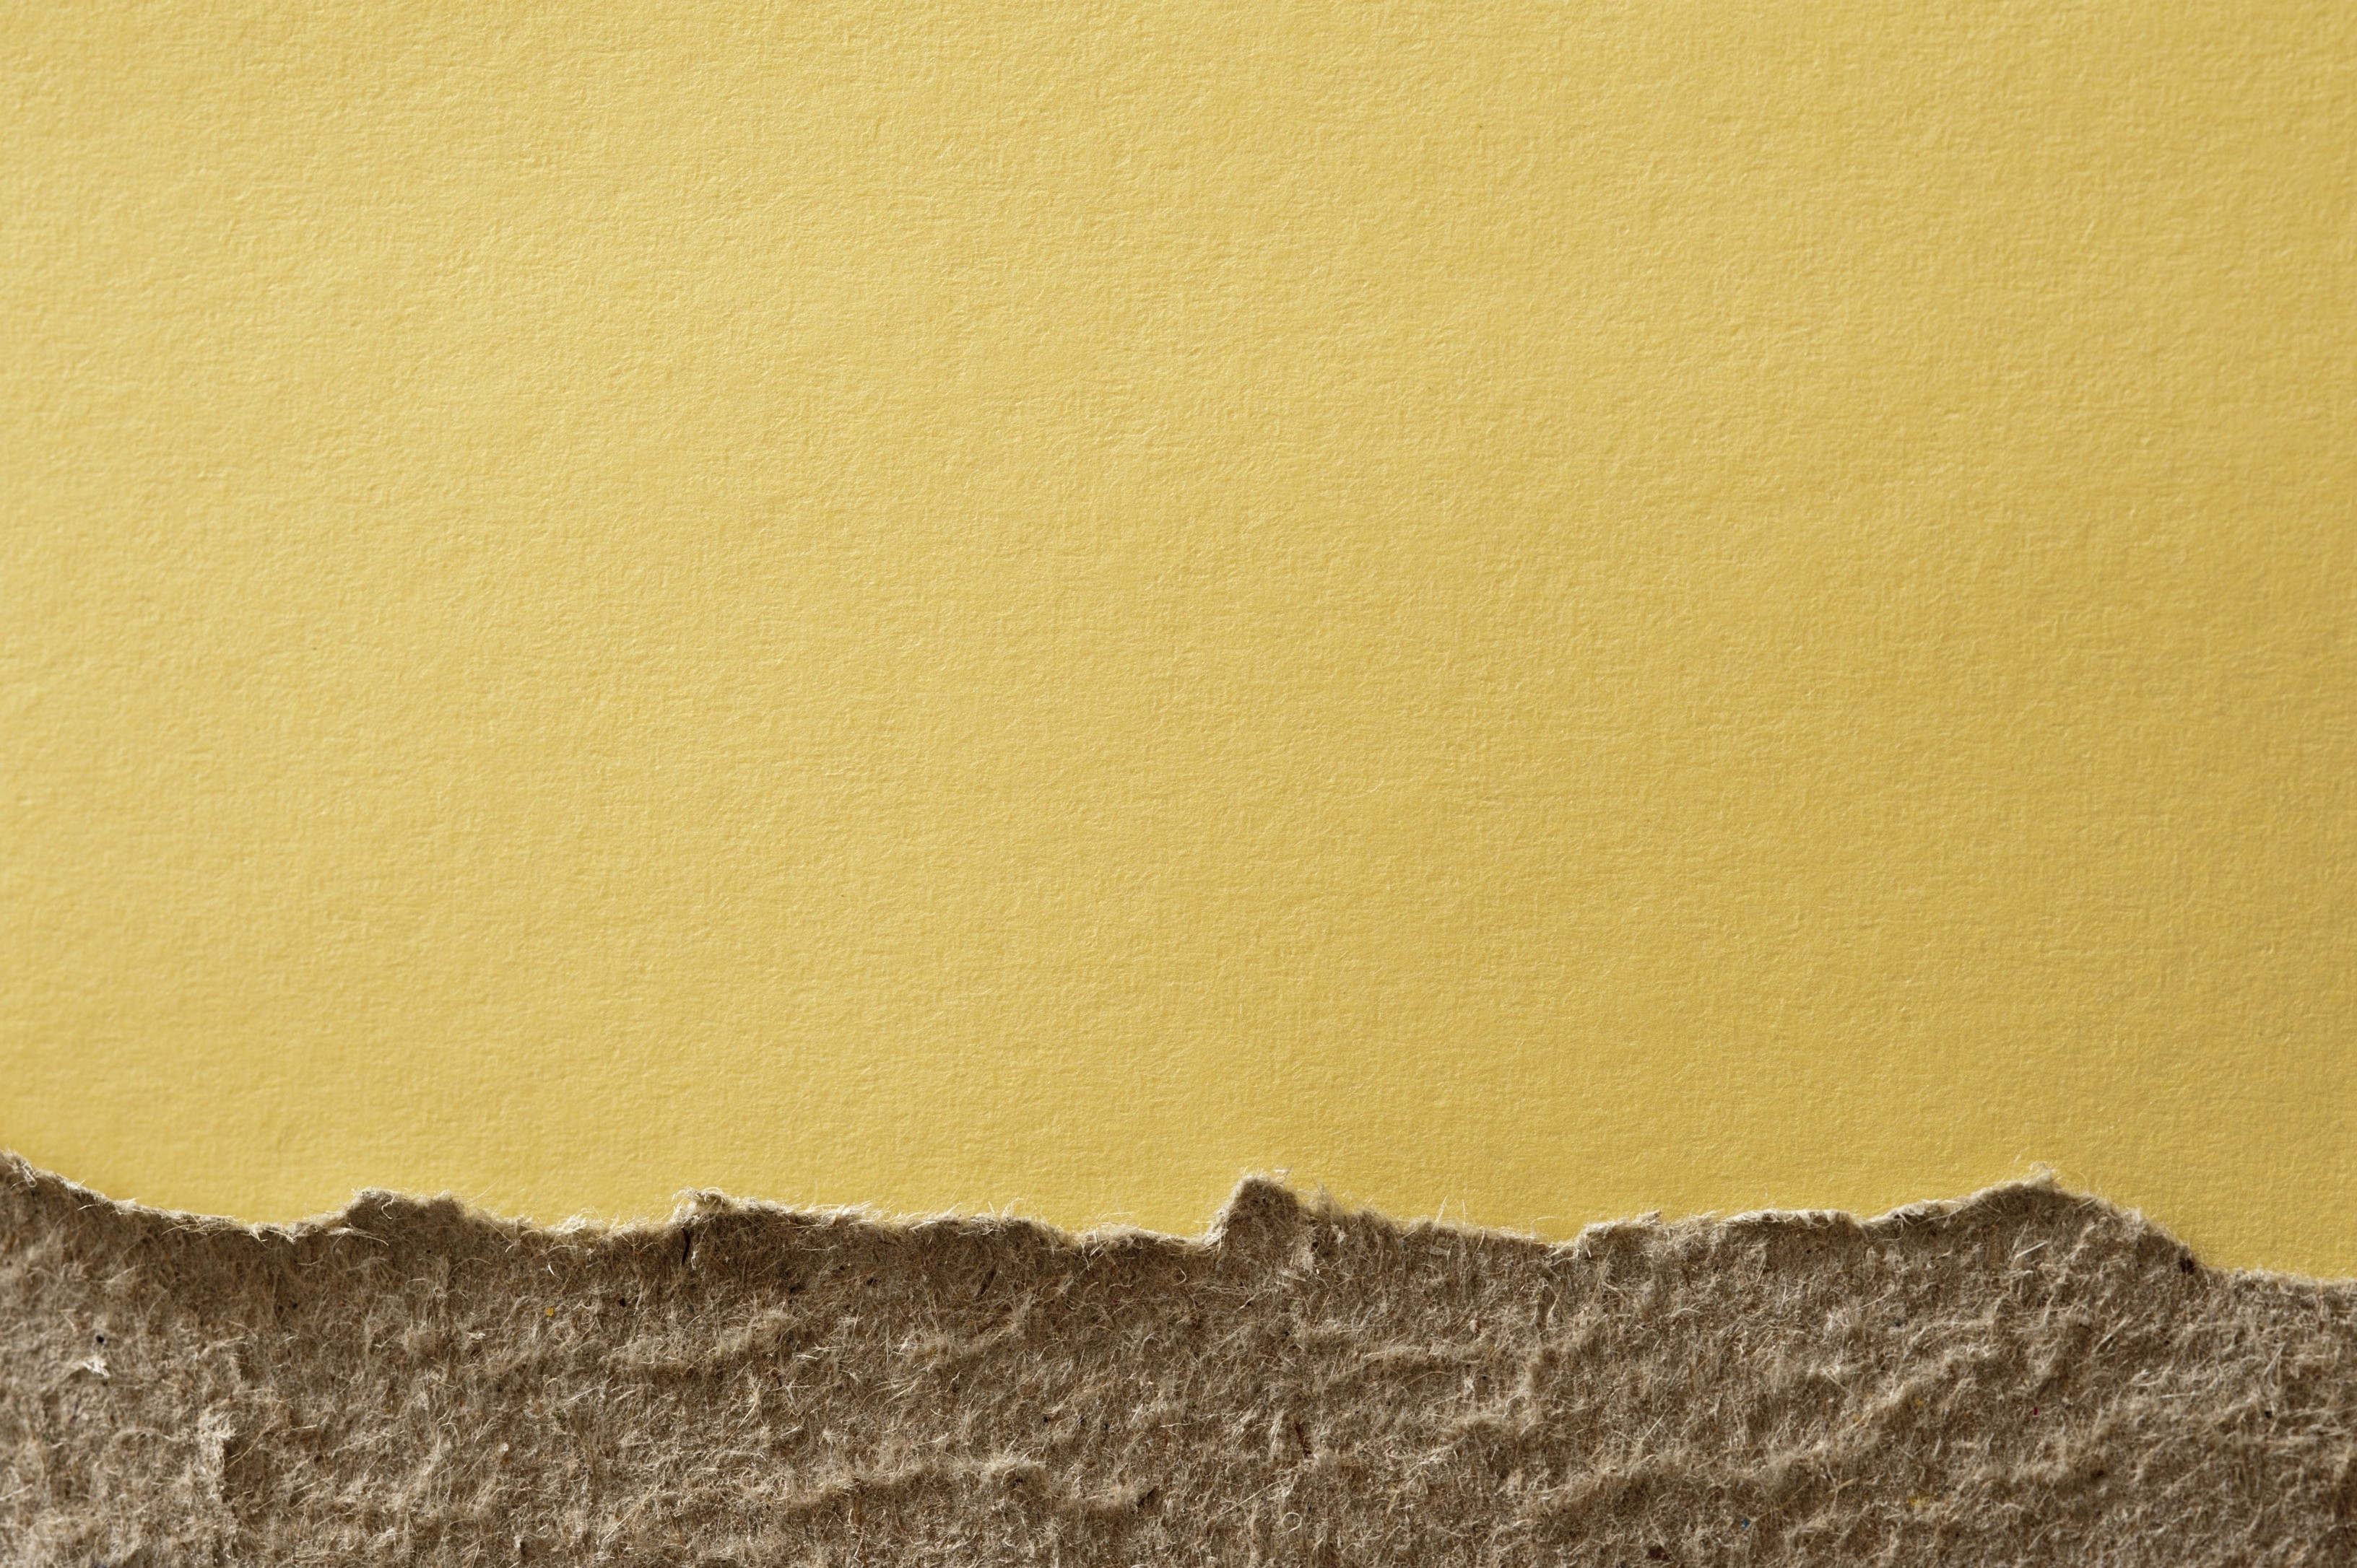 rough paper border | Free backgrounds and textures | Cr103.com